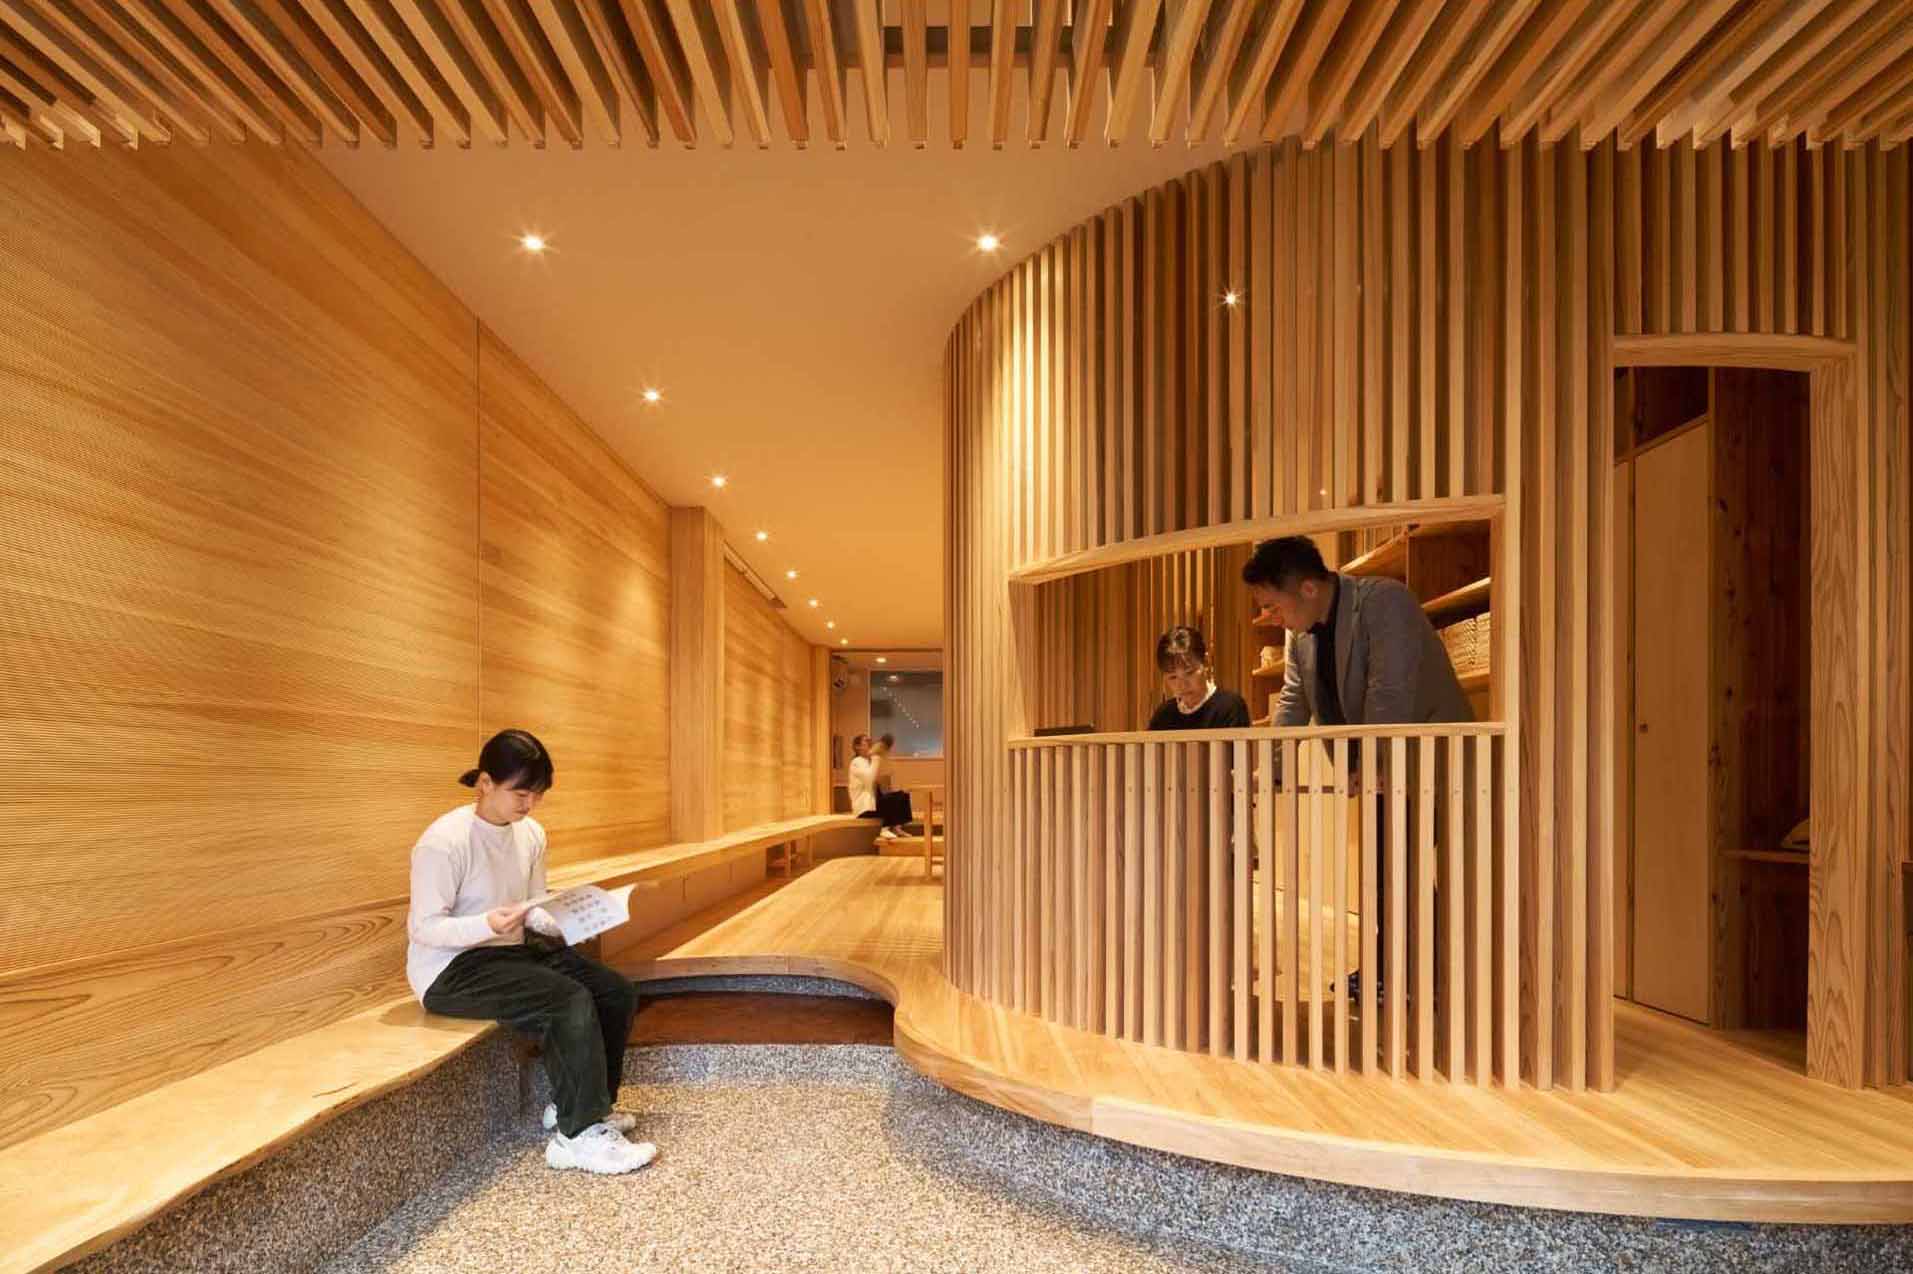 Ujigawa Ohzono Architects has designed a small wood-lined office that was once a parking lot in Kyoto.